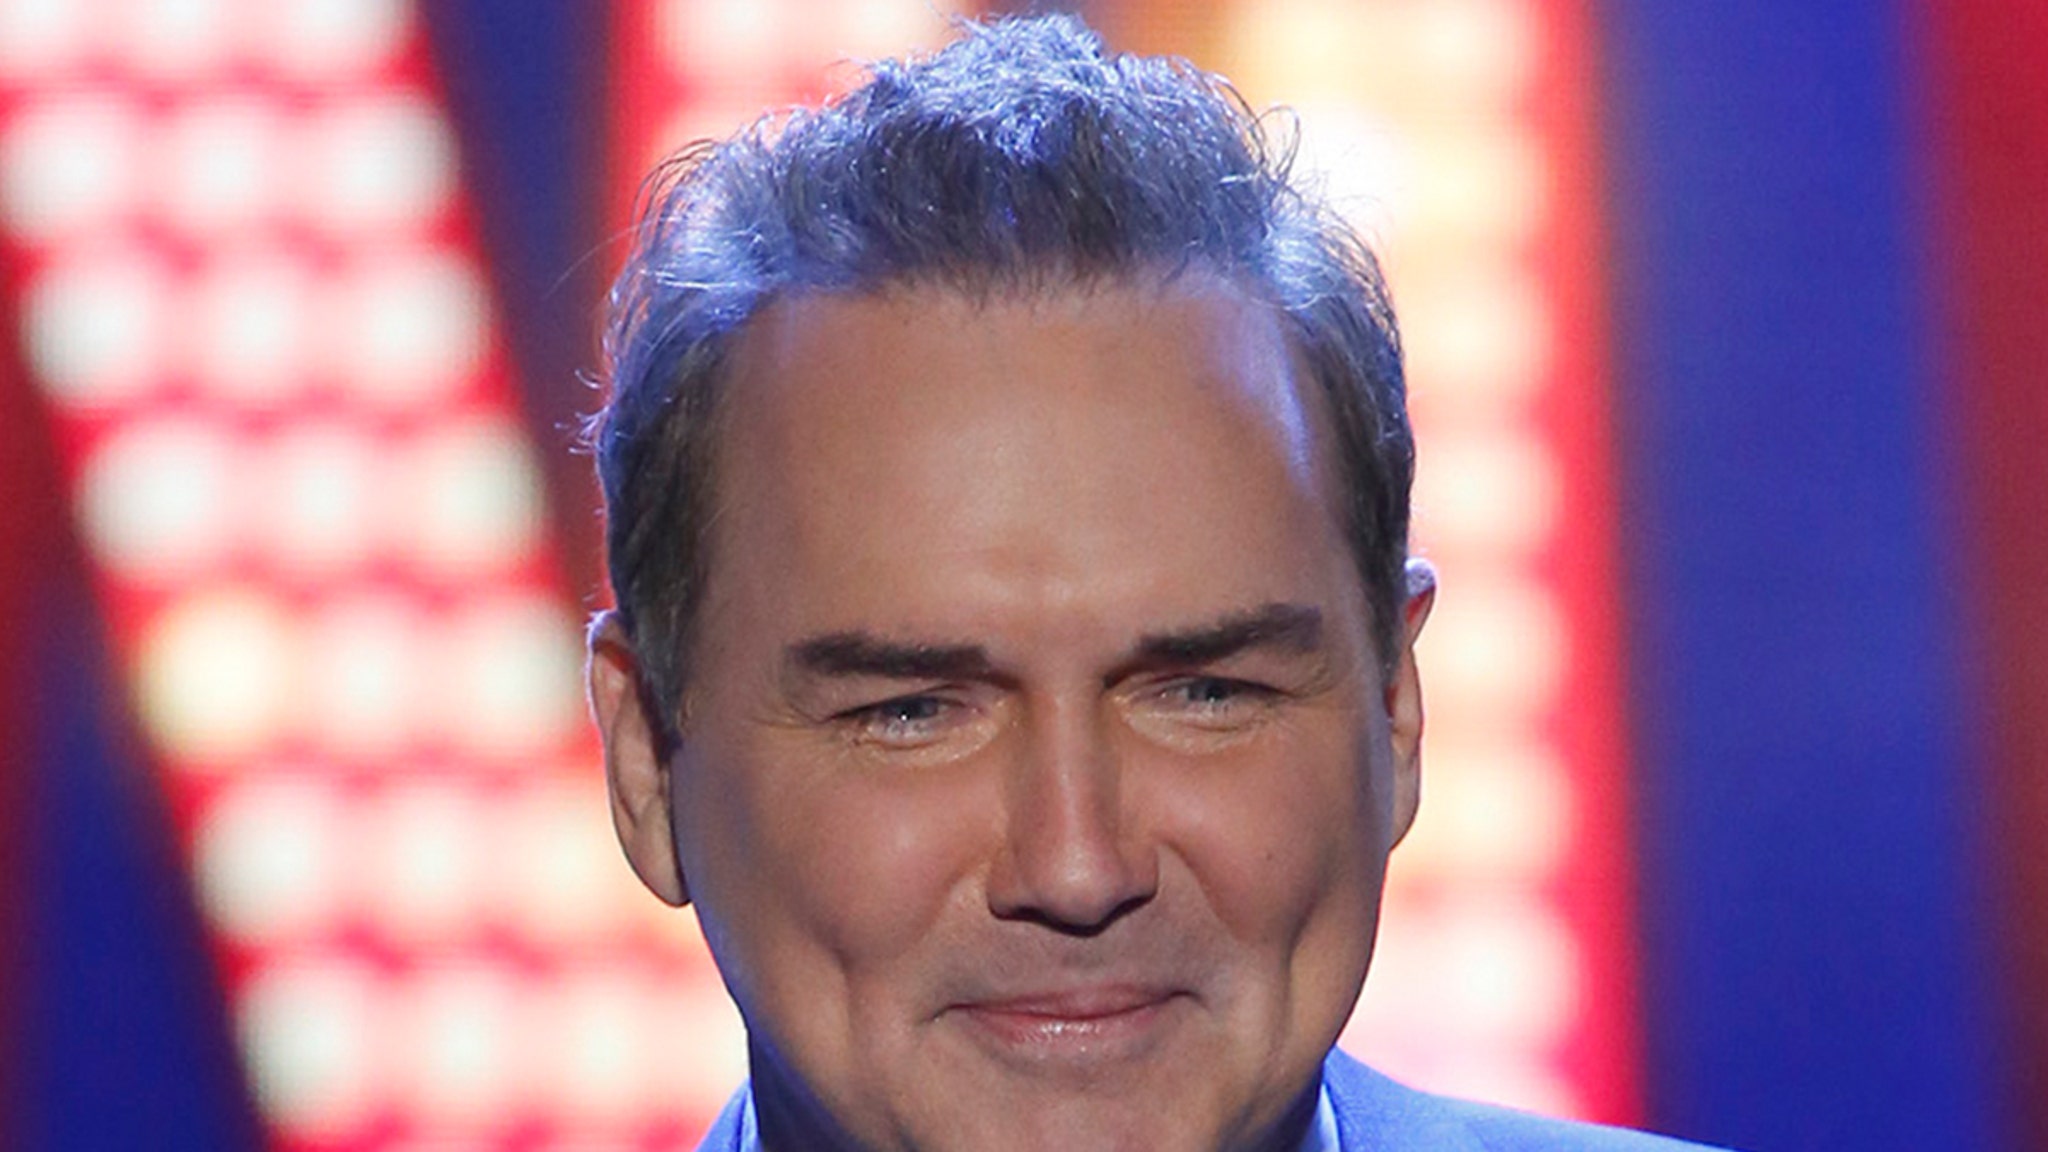 Norm Macdonald Dead at 61 After Private Battle with Cancer